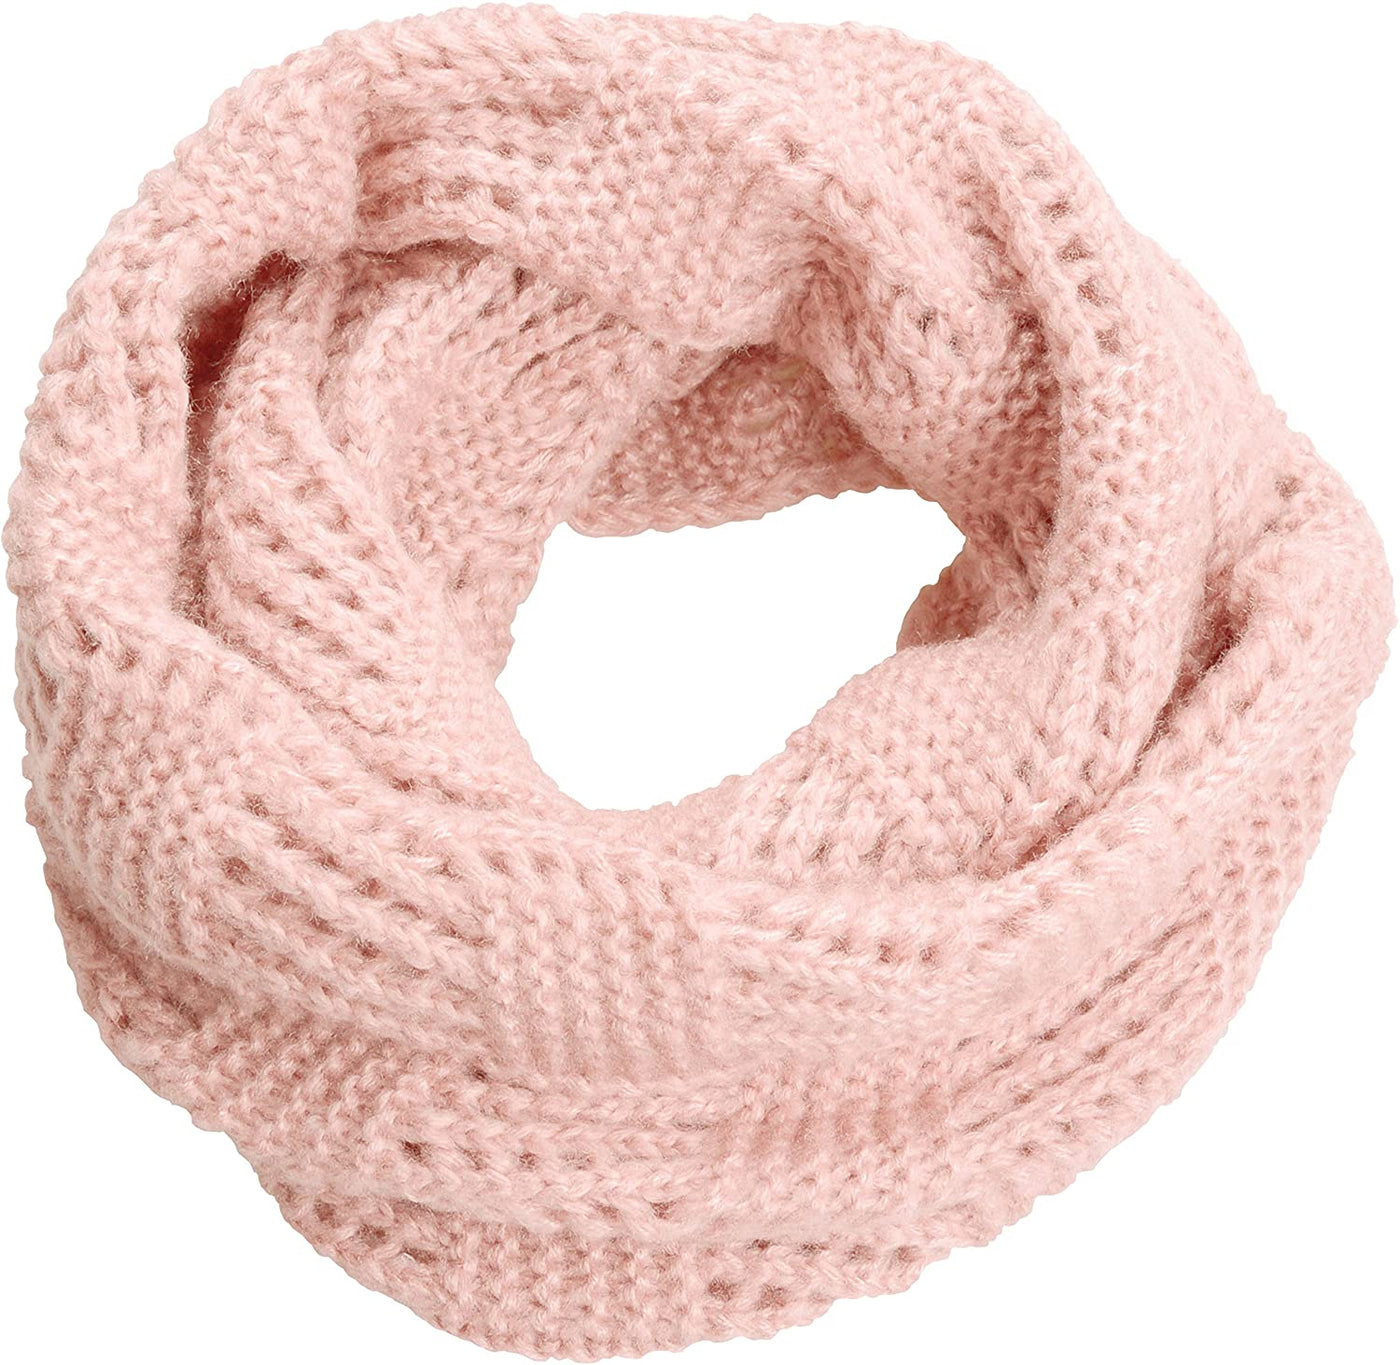 NEOSAN Women's Men Thick Winter Knitted Infinity Circle Loop Scarf